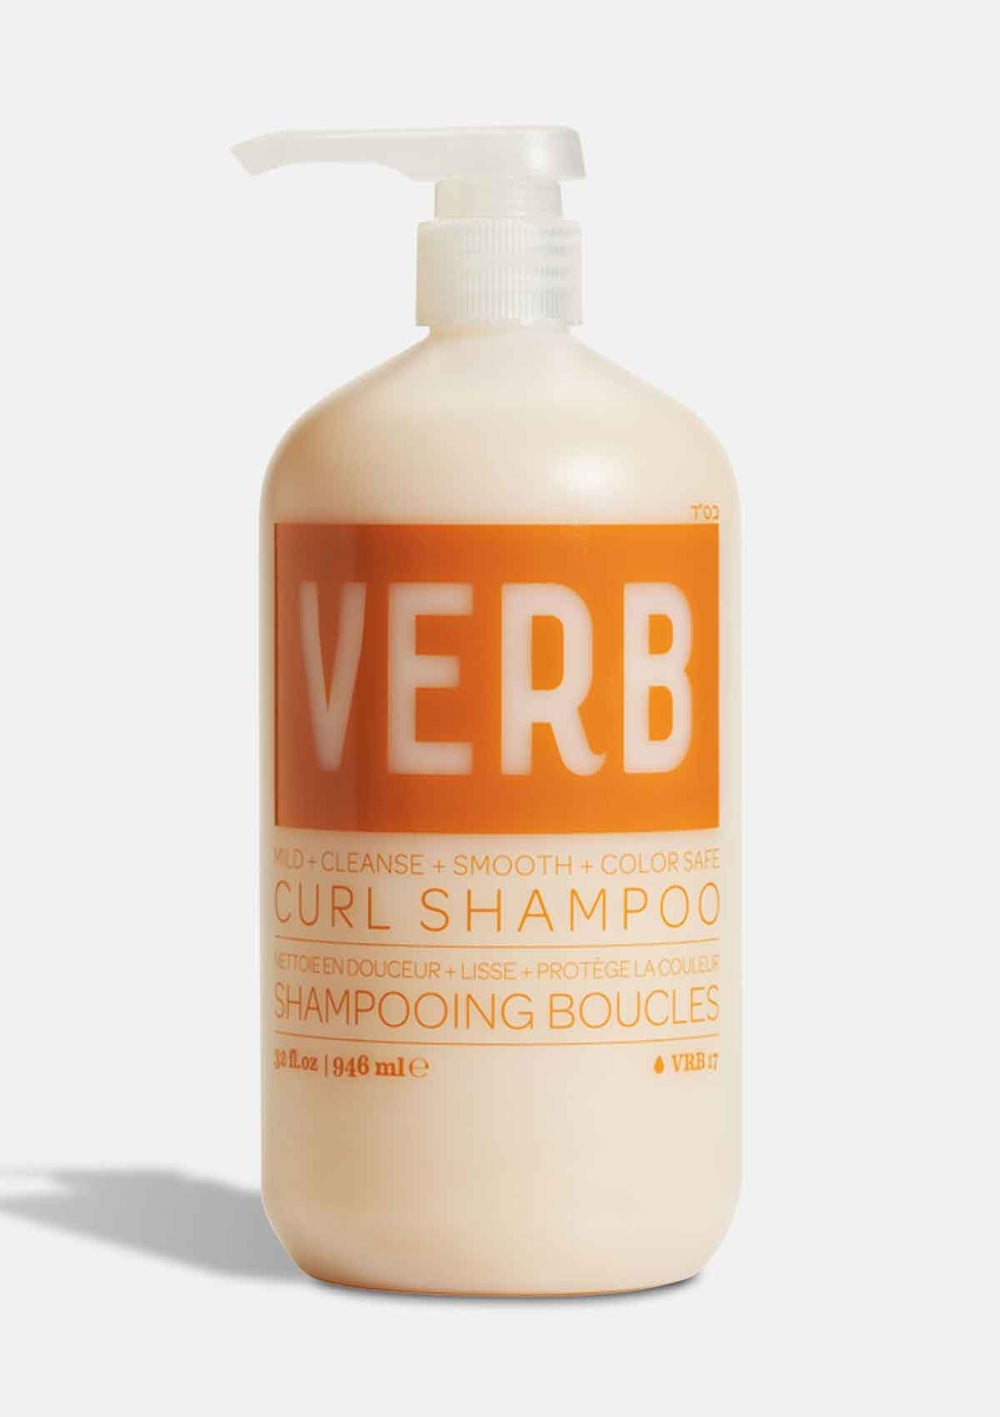 Verb - Curl Shampoo Mild + Cleanse + Smooth + Color Safe |32 oz| - by Verb |ProCare Outlet|